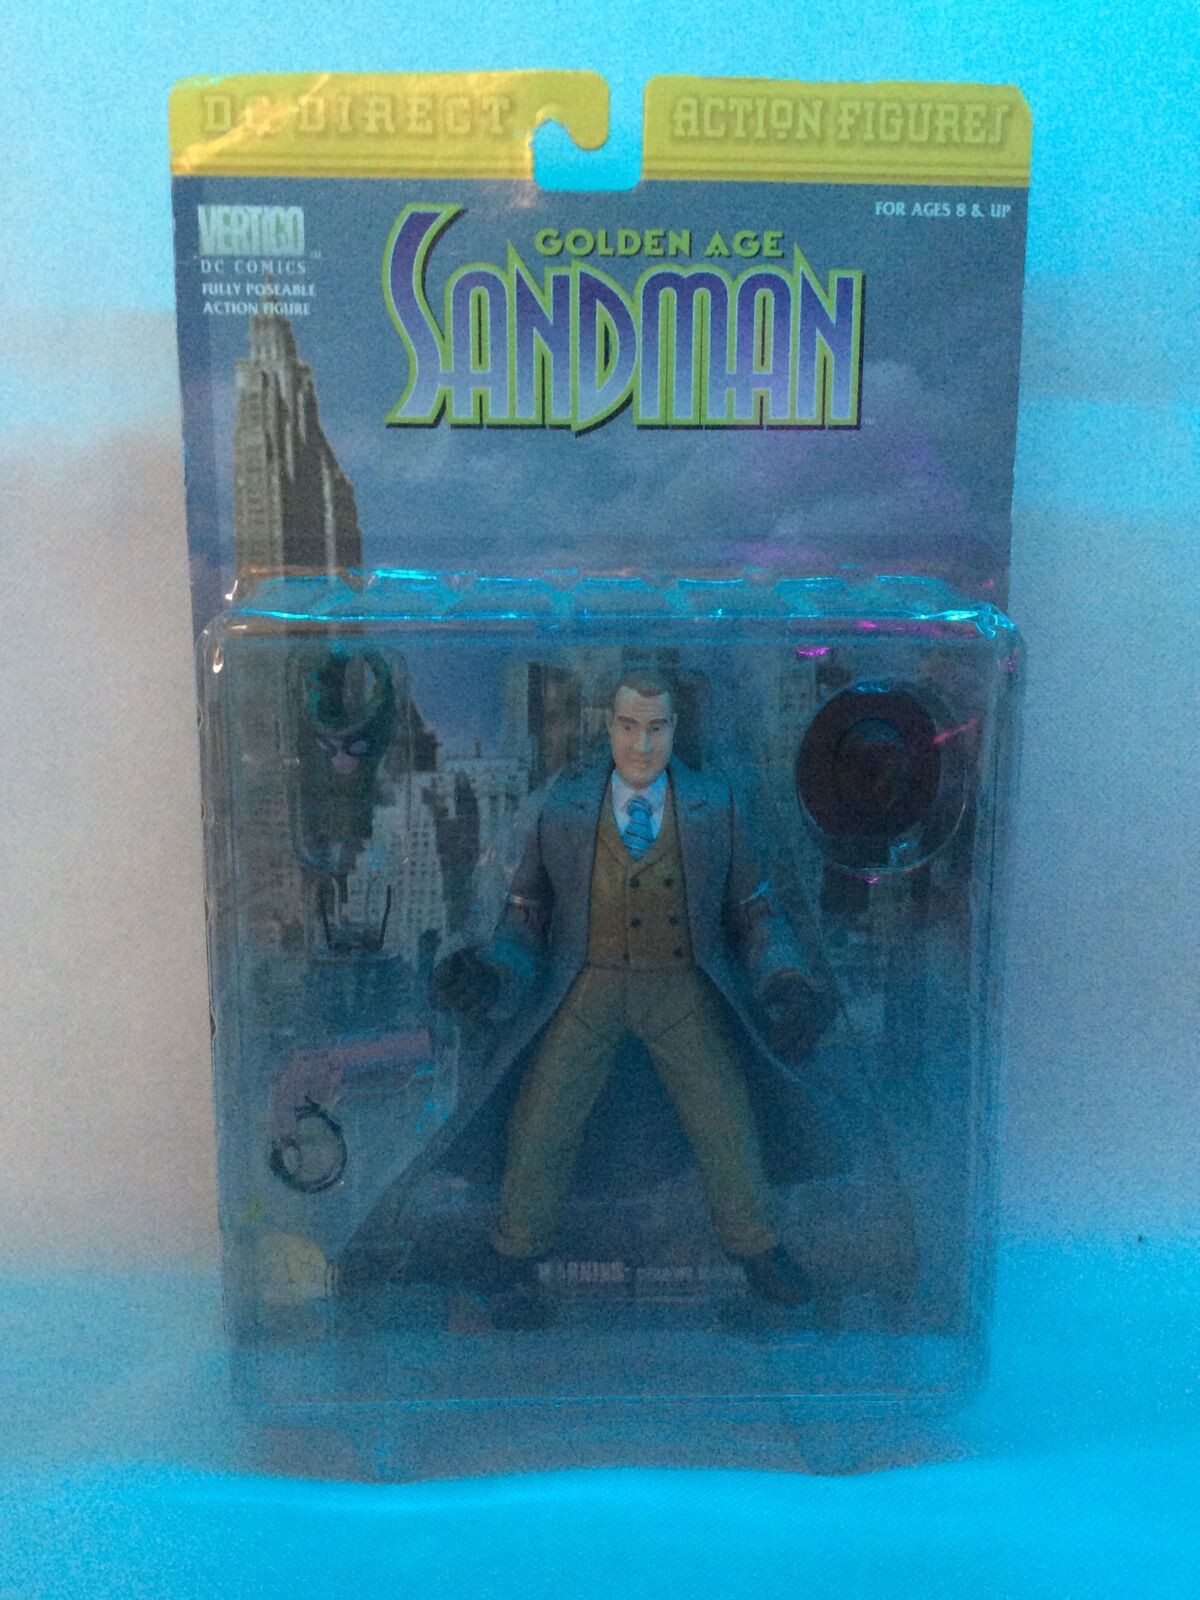 The Golden Age Sandman DC Direct Justice Society Of America 2001 Action Figure